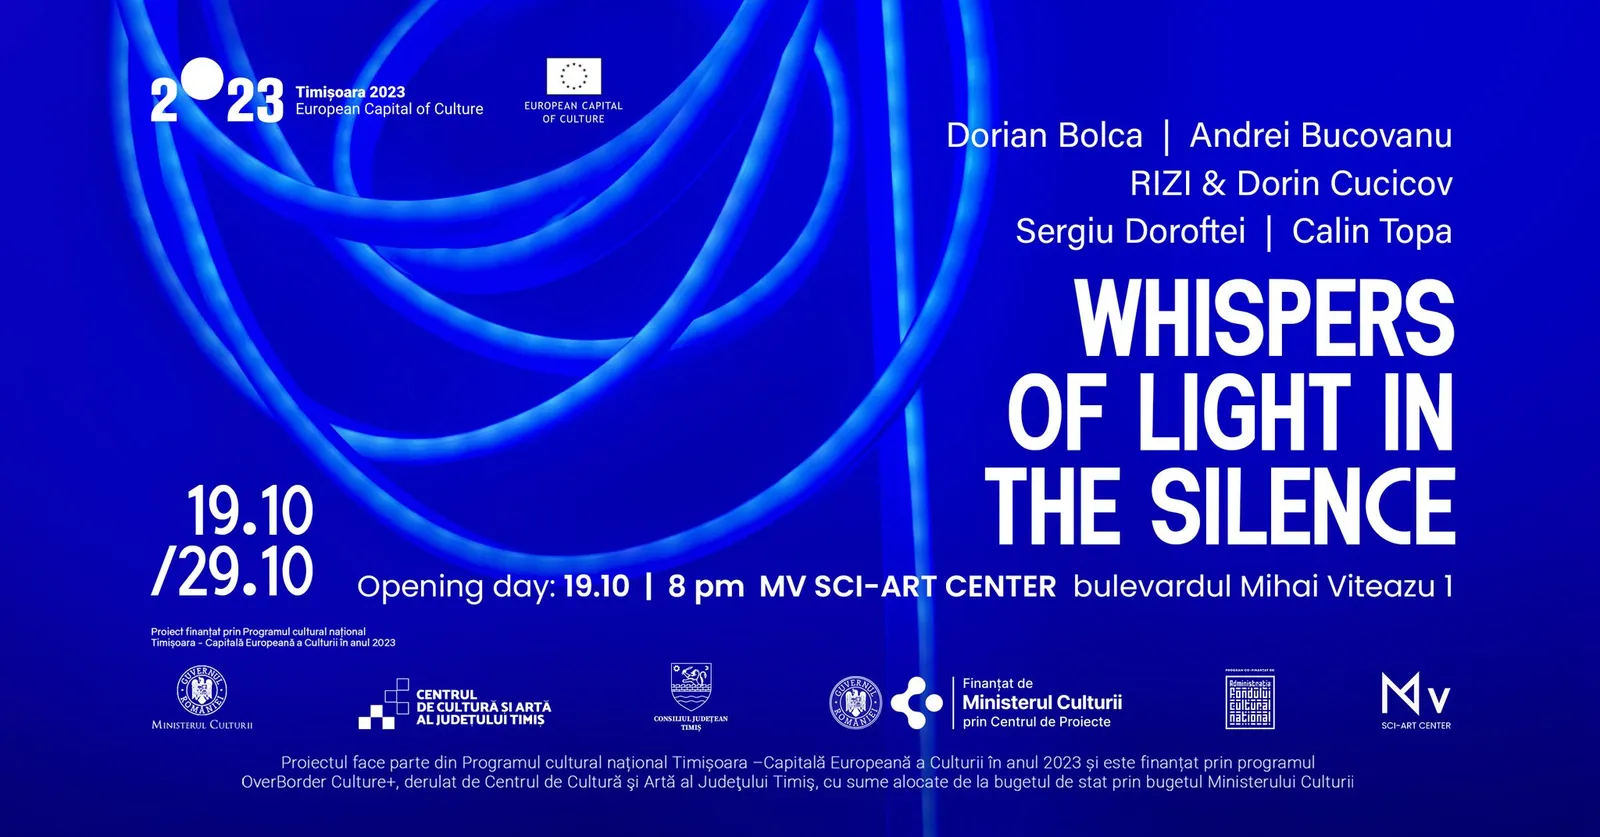 Preview event "Whispers of light in the silence" Exhibition